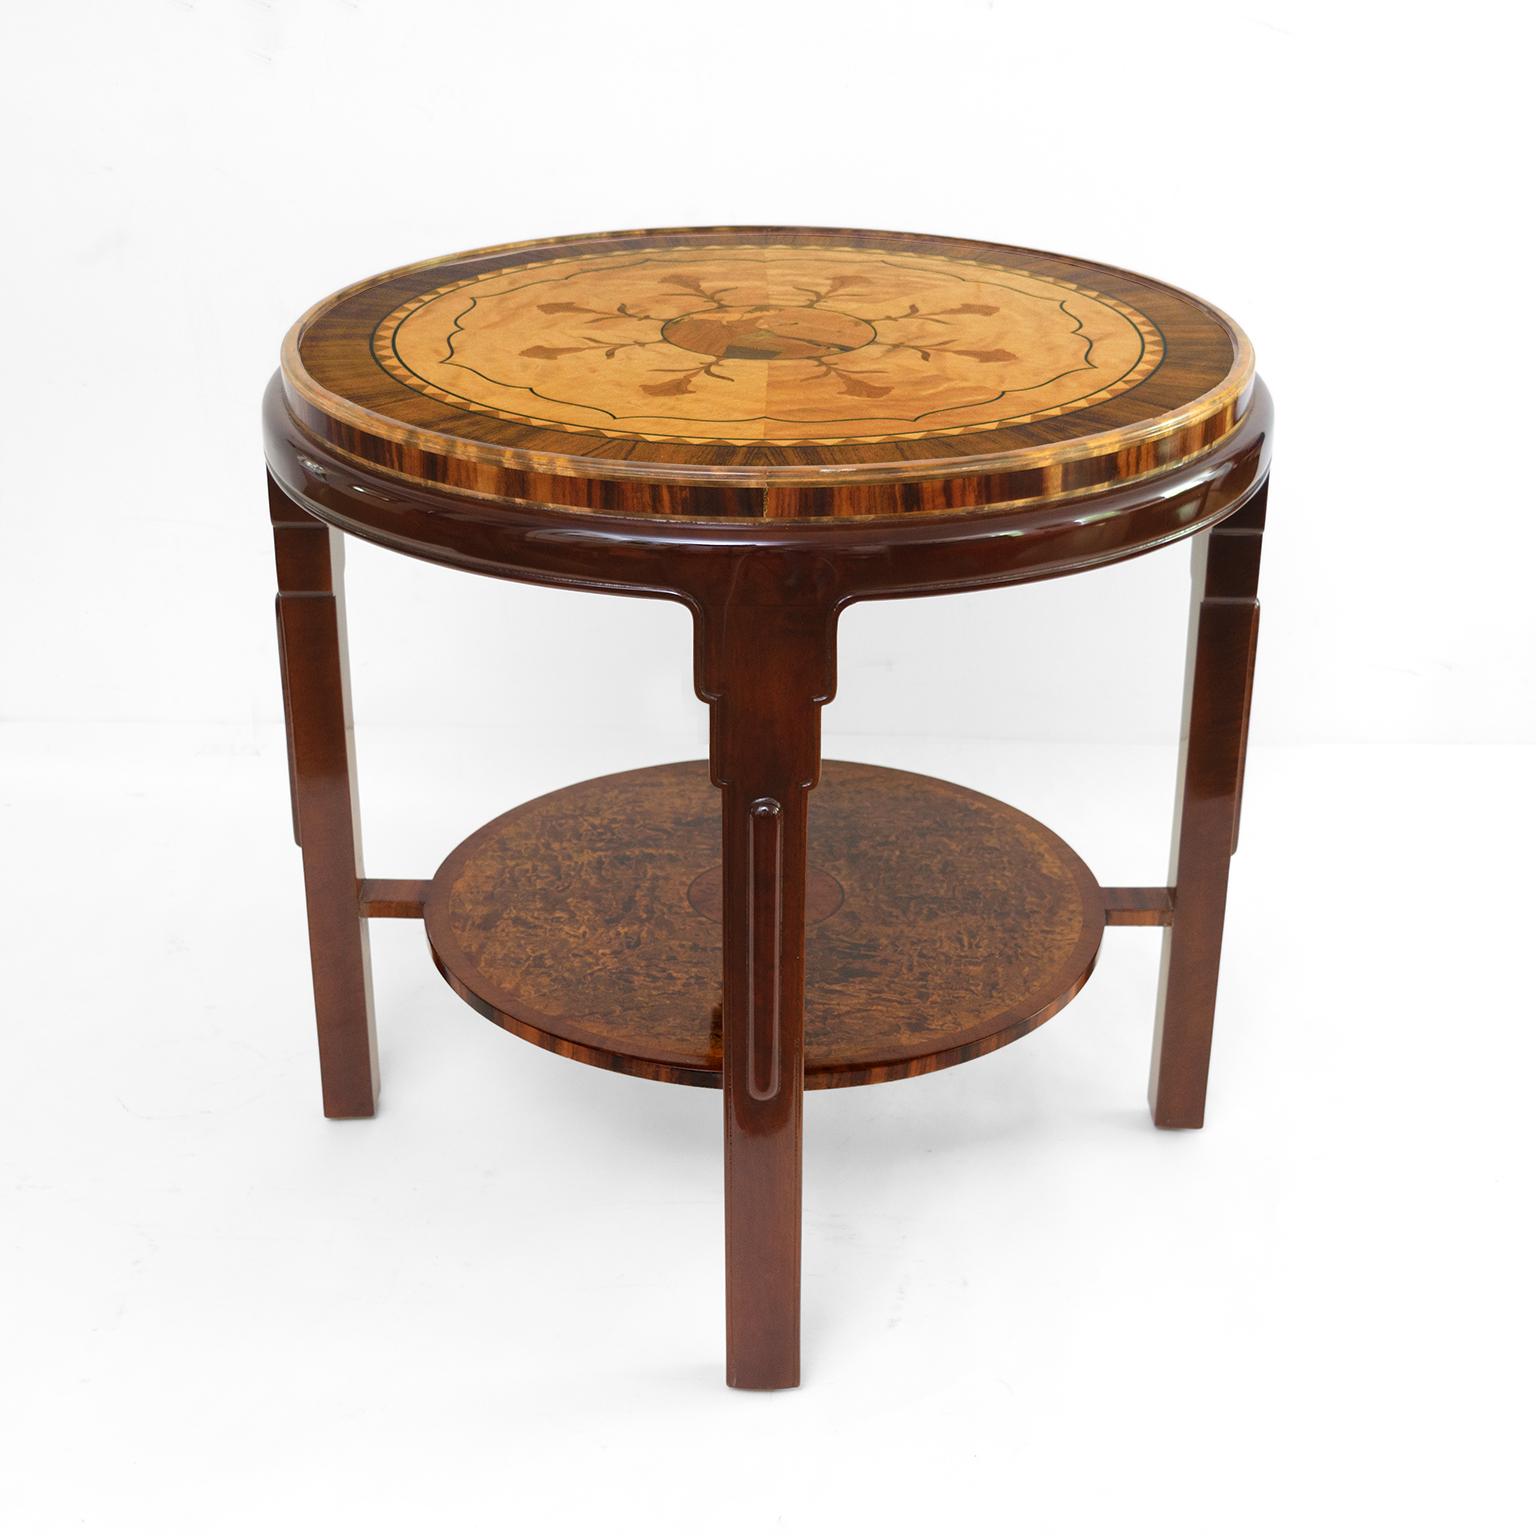 Swedish Grace (1920-35) side table lavishly decorated in a variety of exotic wood veneers. The top has a rosewood border which frames a circle of birch in eight sections, each displaying a stylized stem and flower. At the very center is a scene of